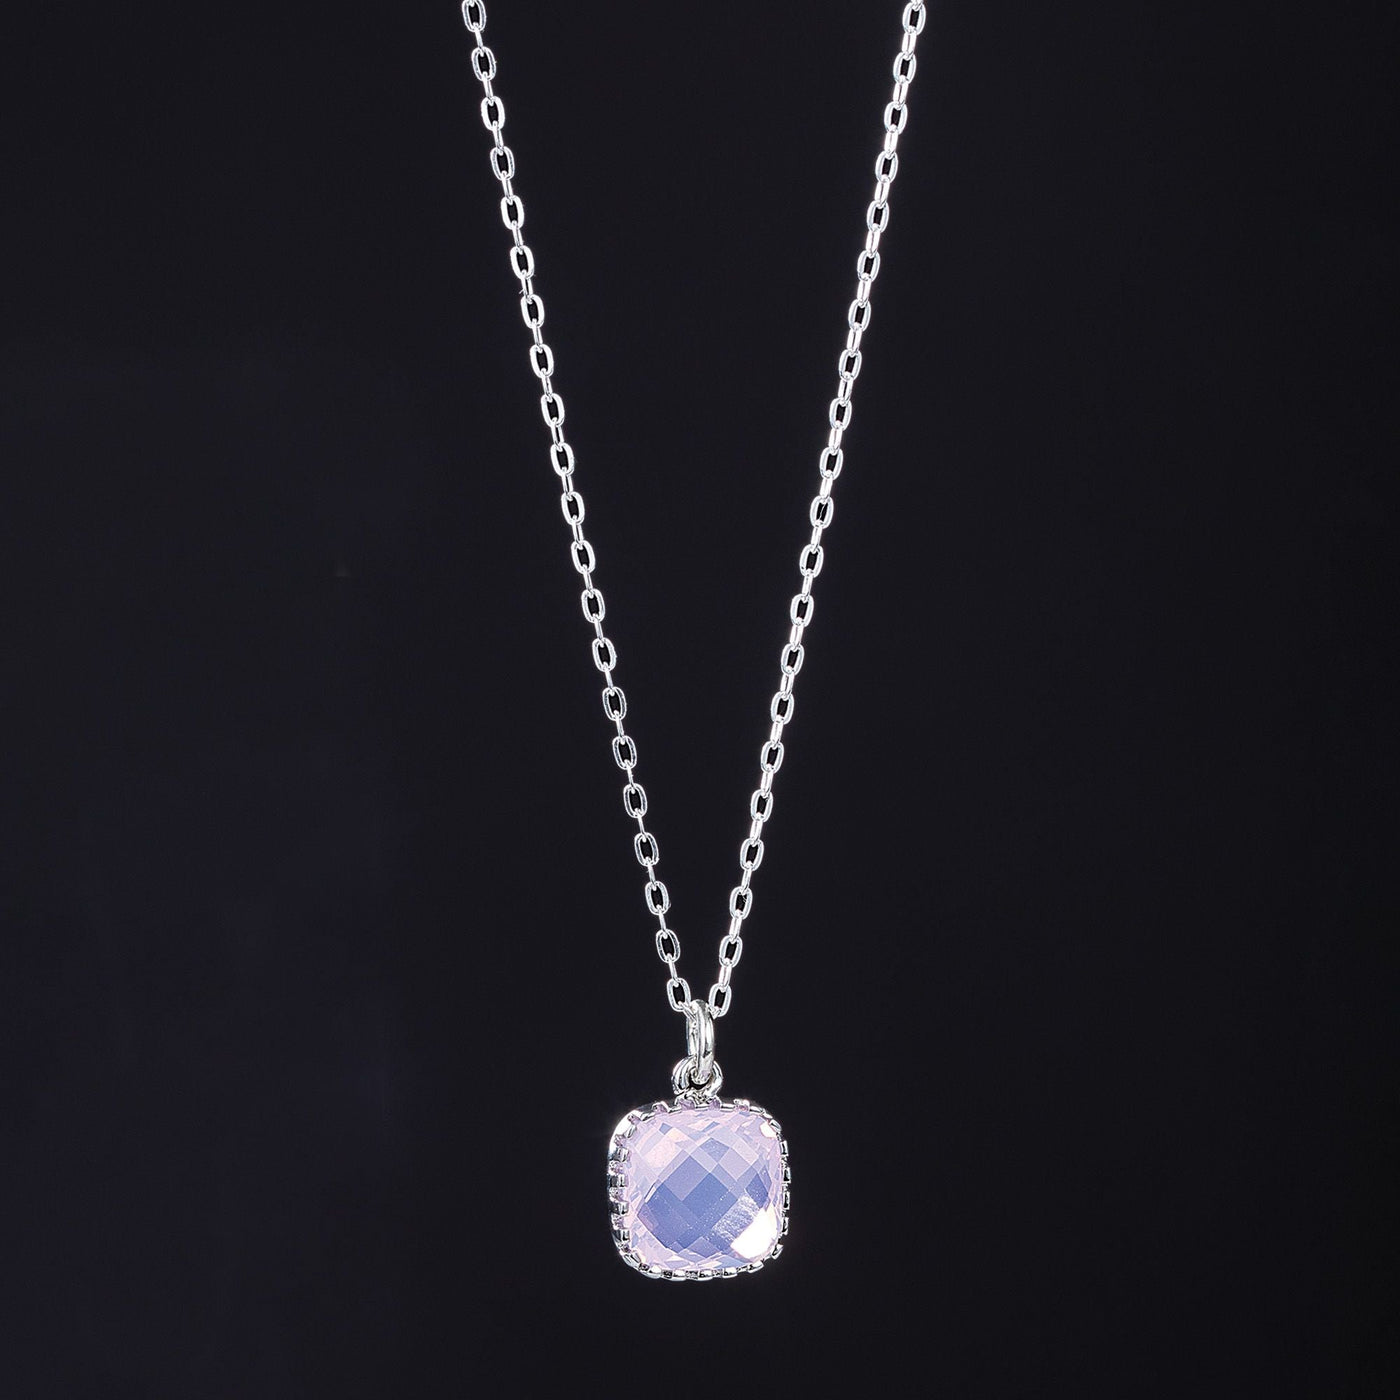 Violet Opal Faceted Glass Necklace